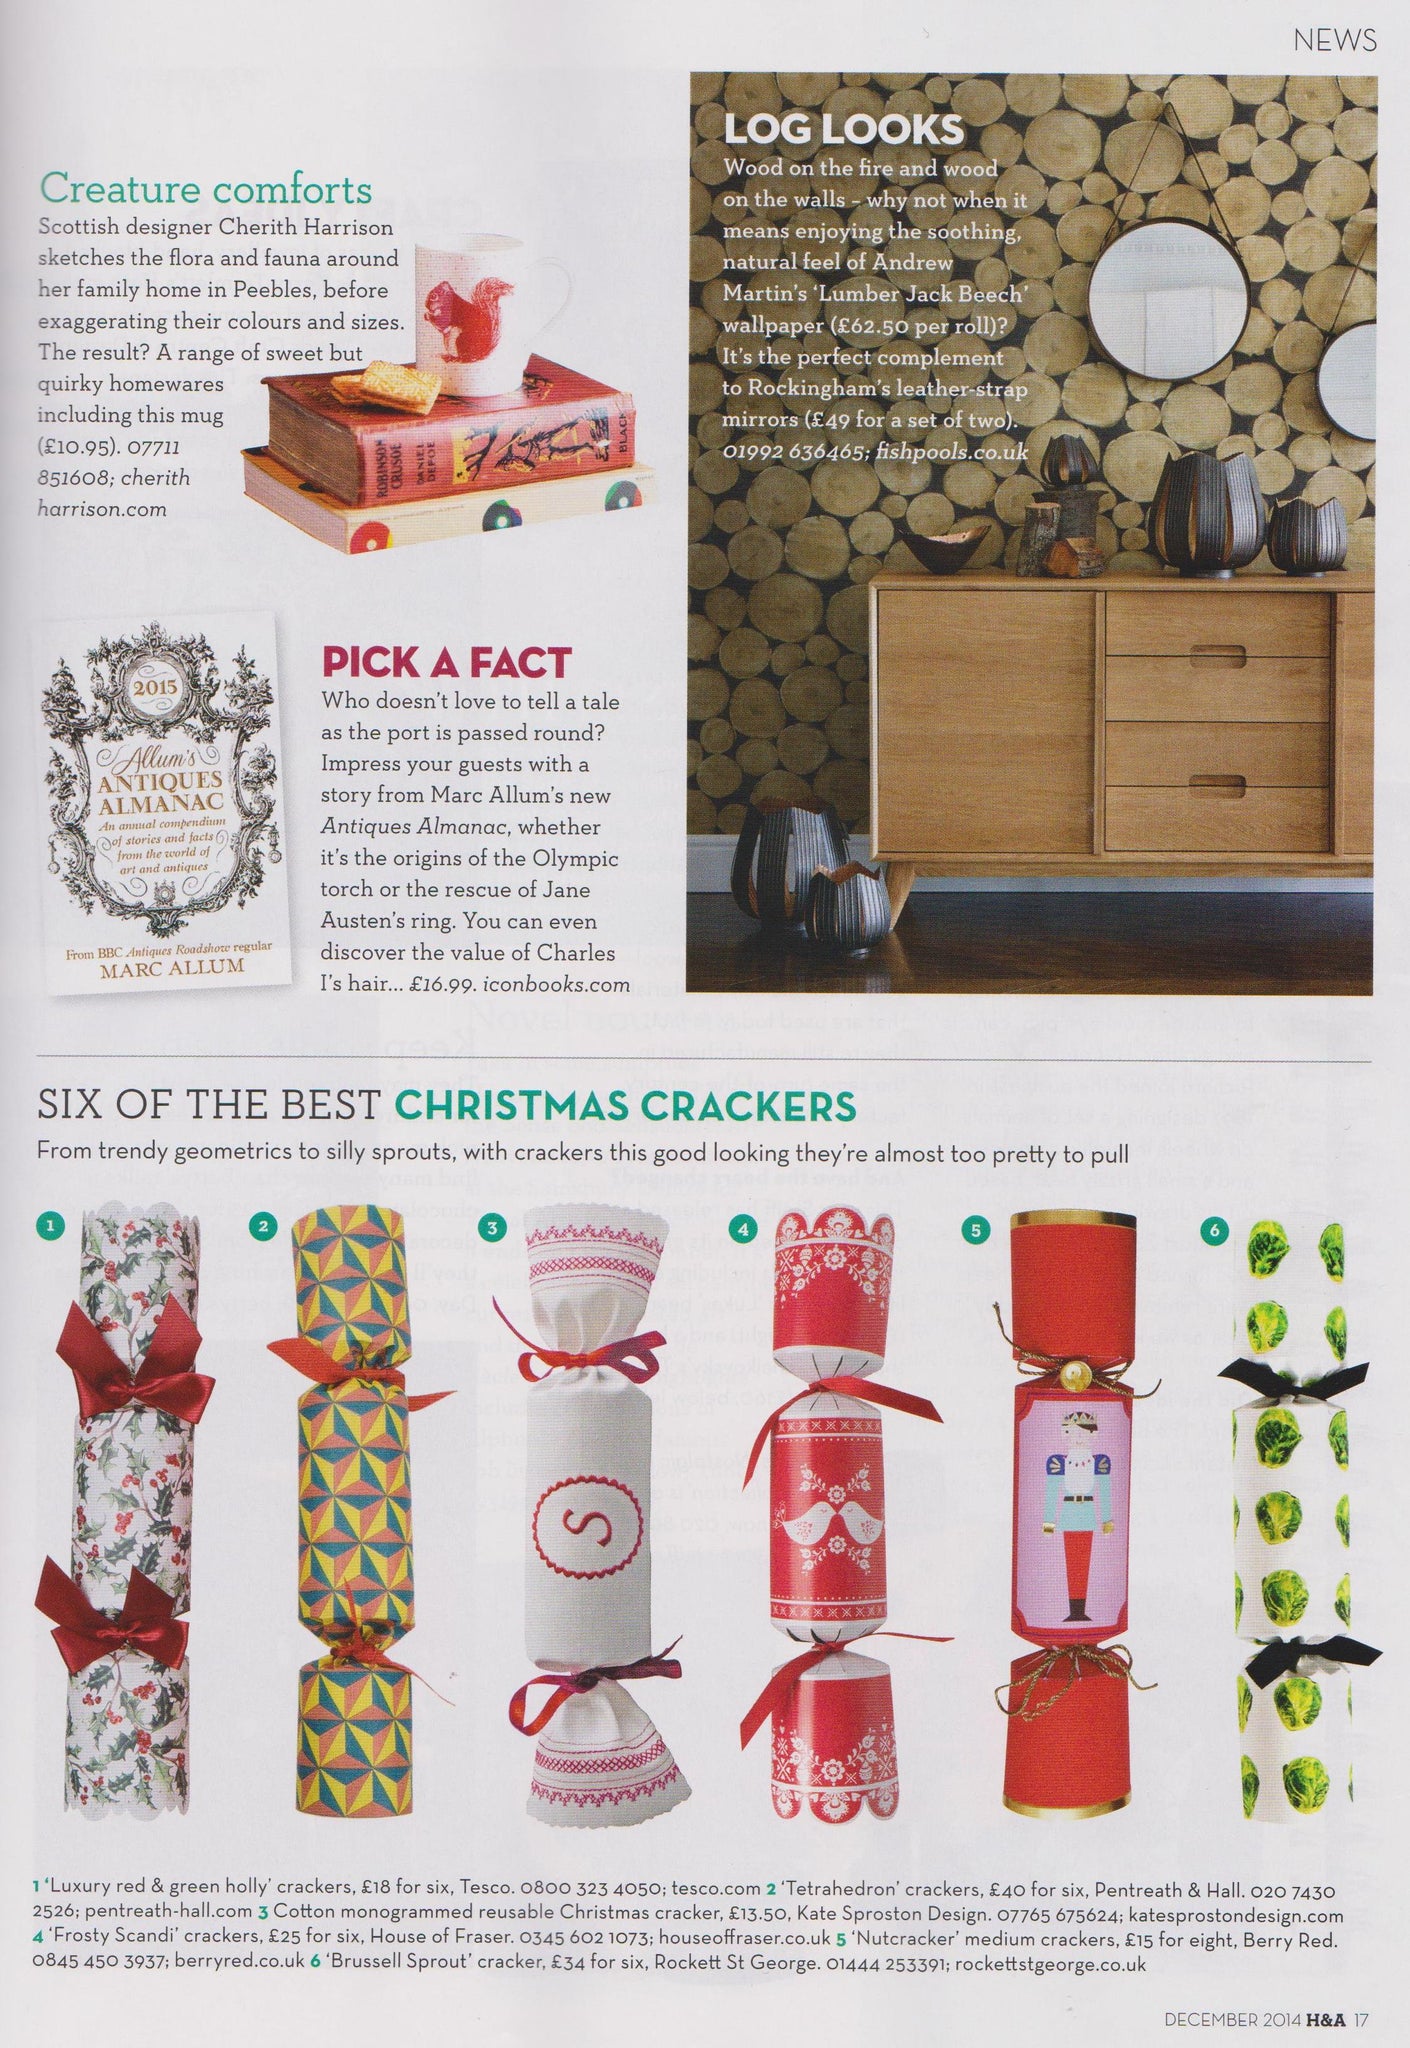 Ivory cotton monogrammed reusable Christmas cracker by Kate Sproston Design as featured in Homes & Antiques Magazine December 2014